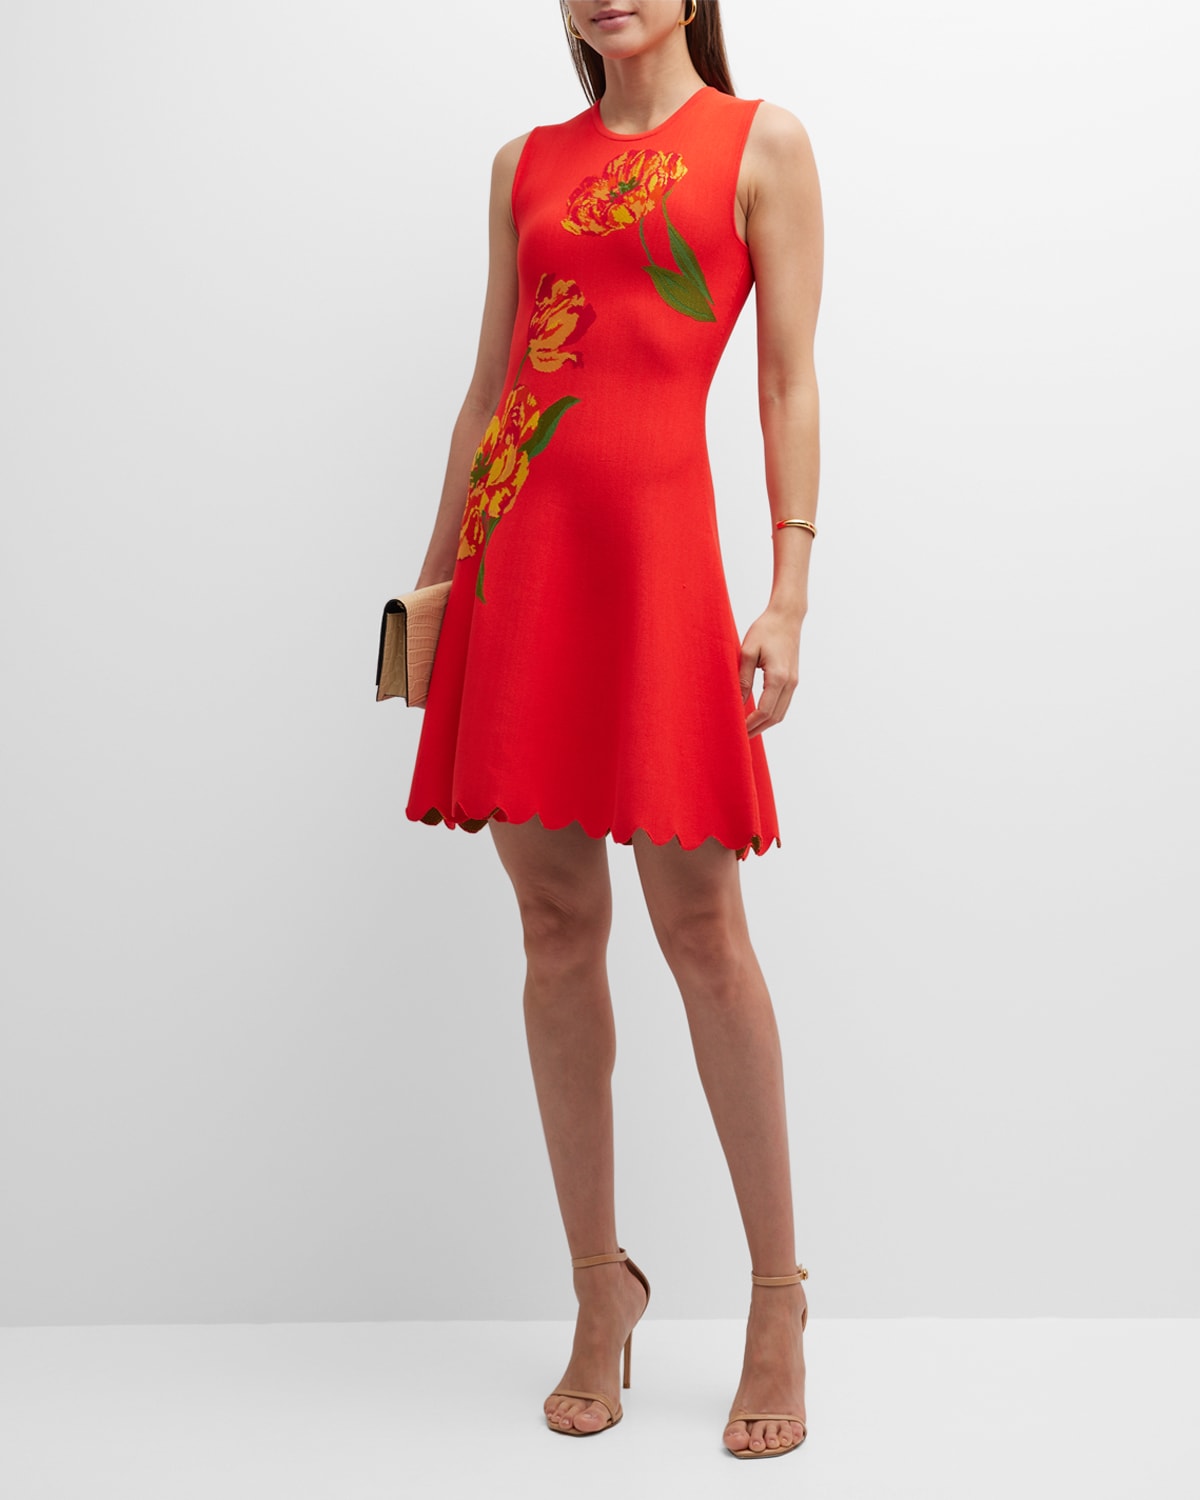 Lela Rose Scalloped Mini Dress with Floral Detail